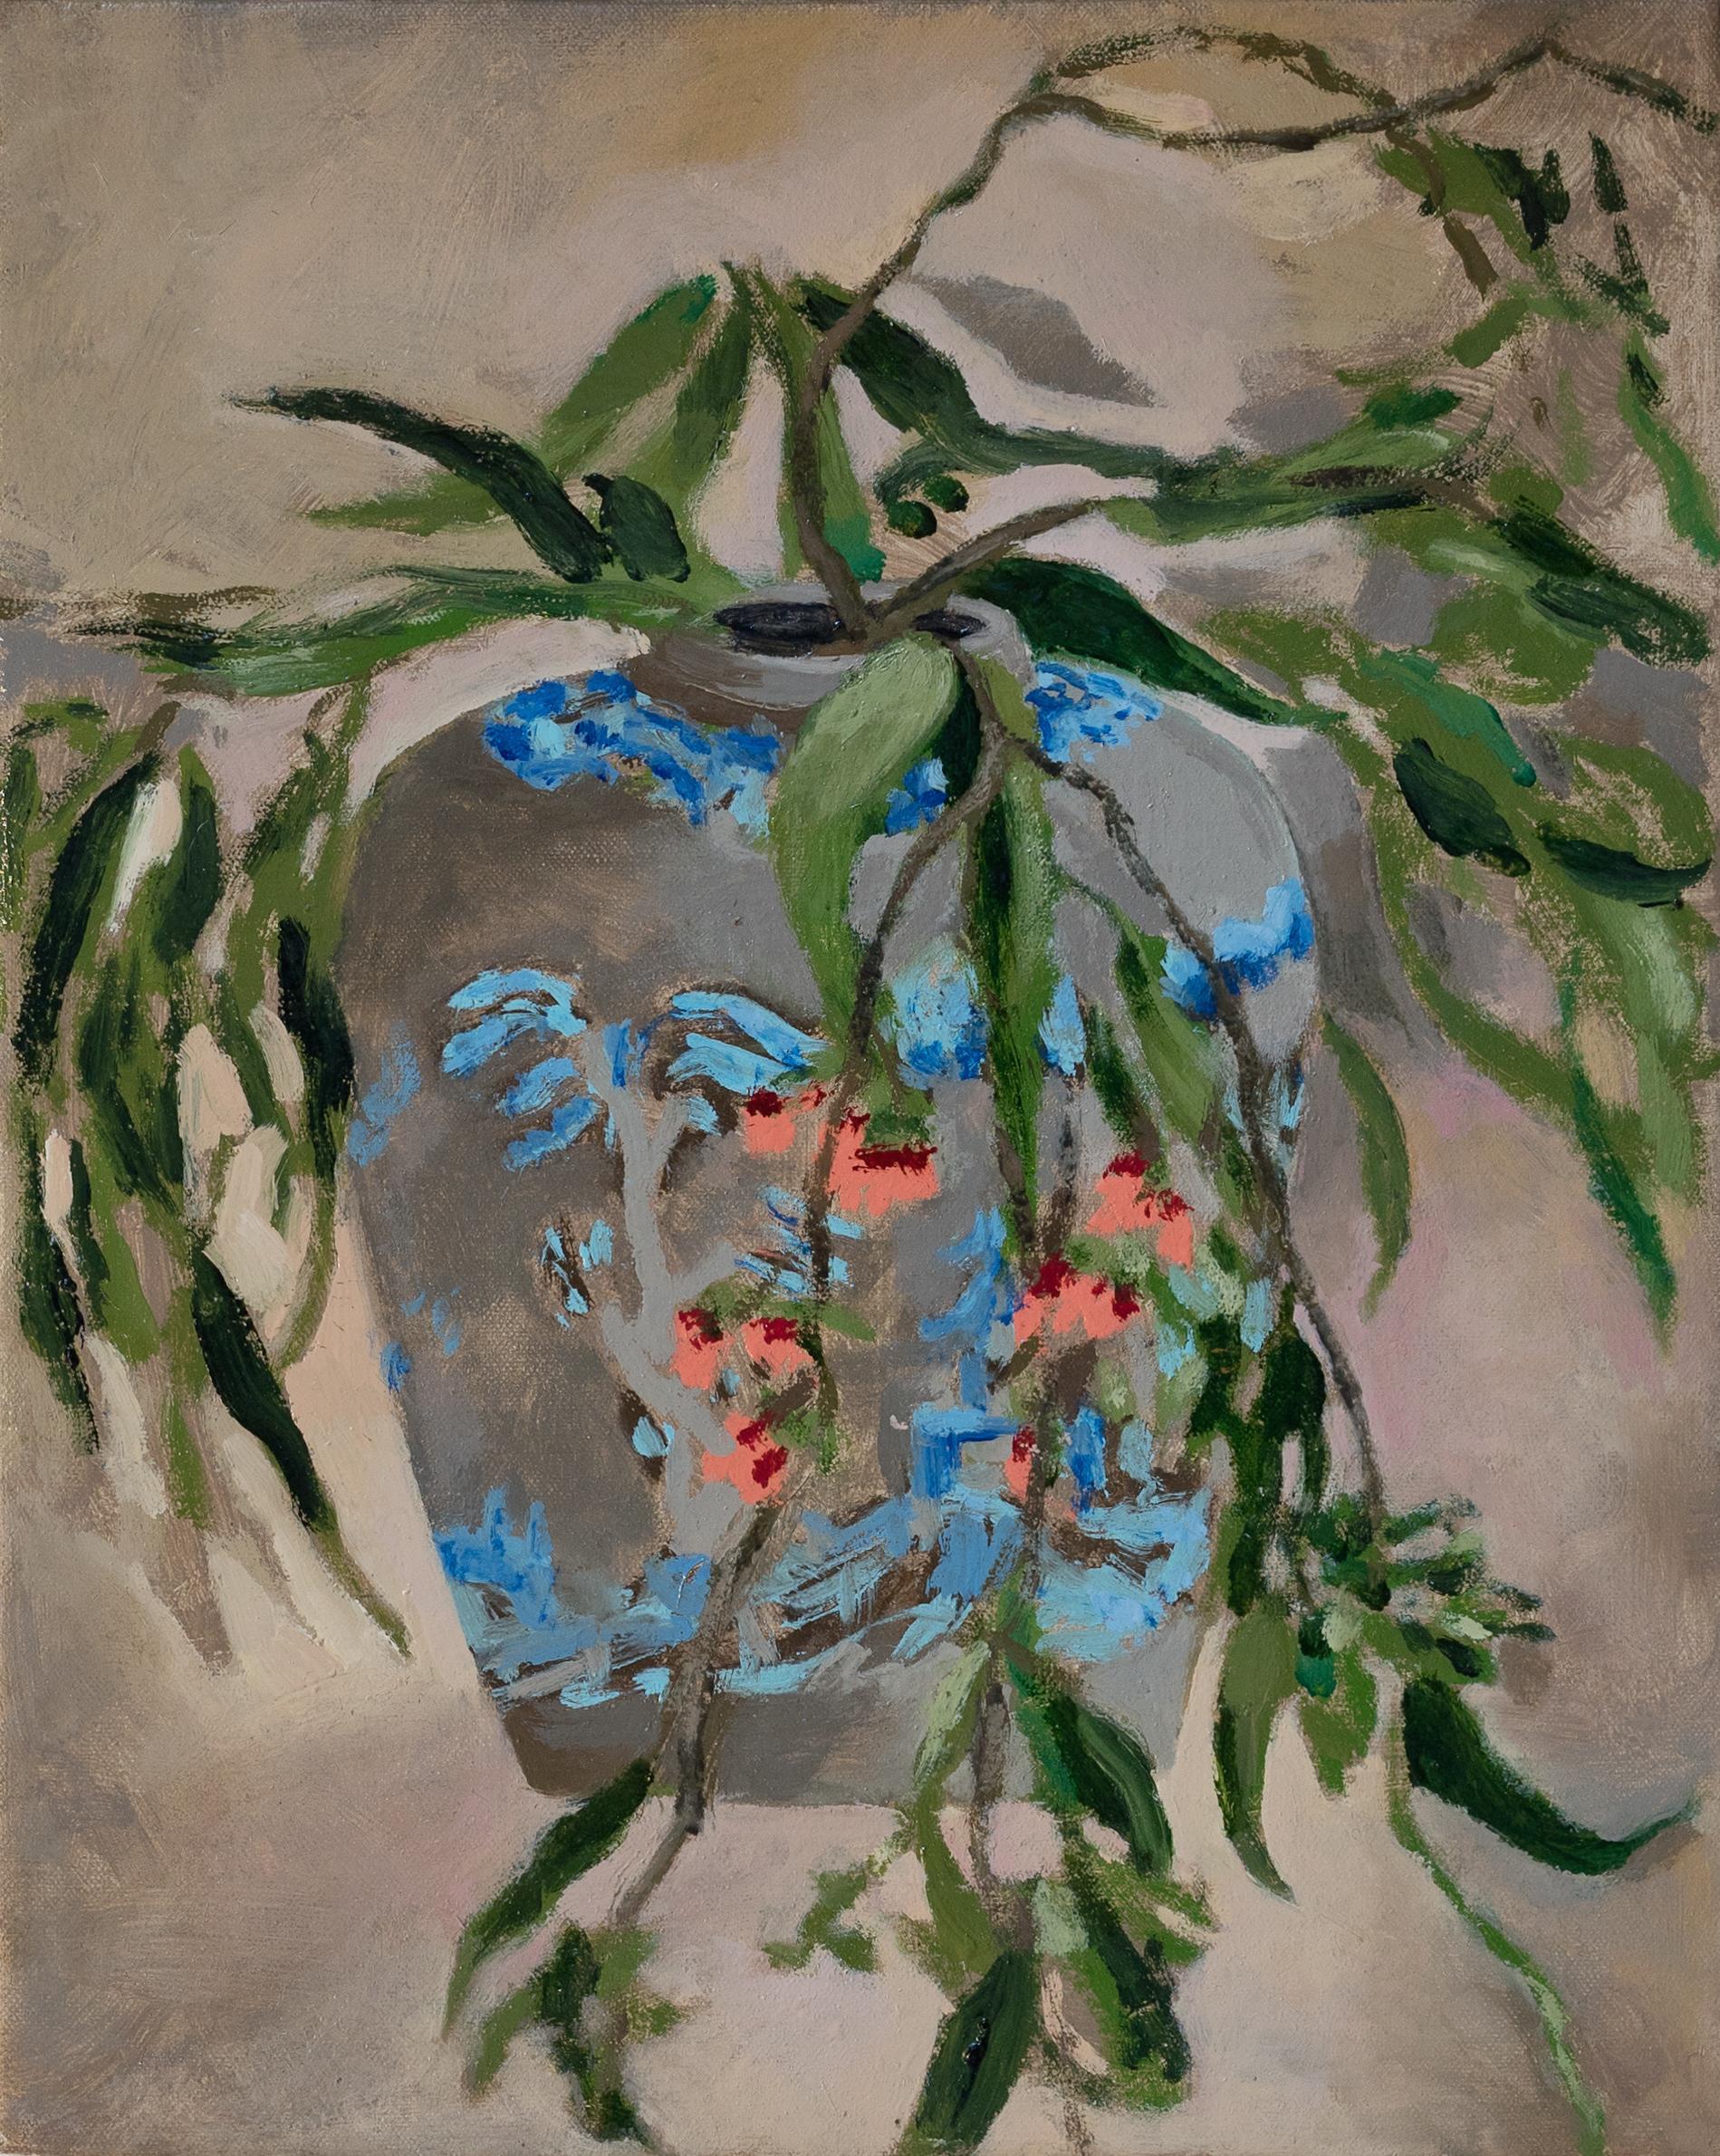 Corymbia ficifolia in Chinese vase, oil on canvas by painter Nils Benson 2019 uses the image of dying eucalyptus leaves and flowers in a Chinese vase to represent space using traditional asian methods of perspective and composition. The painter